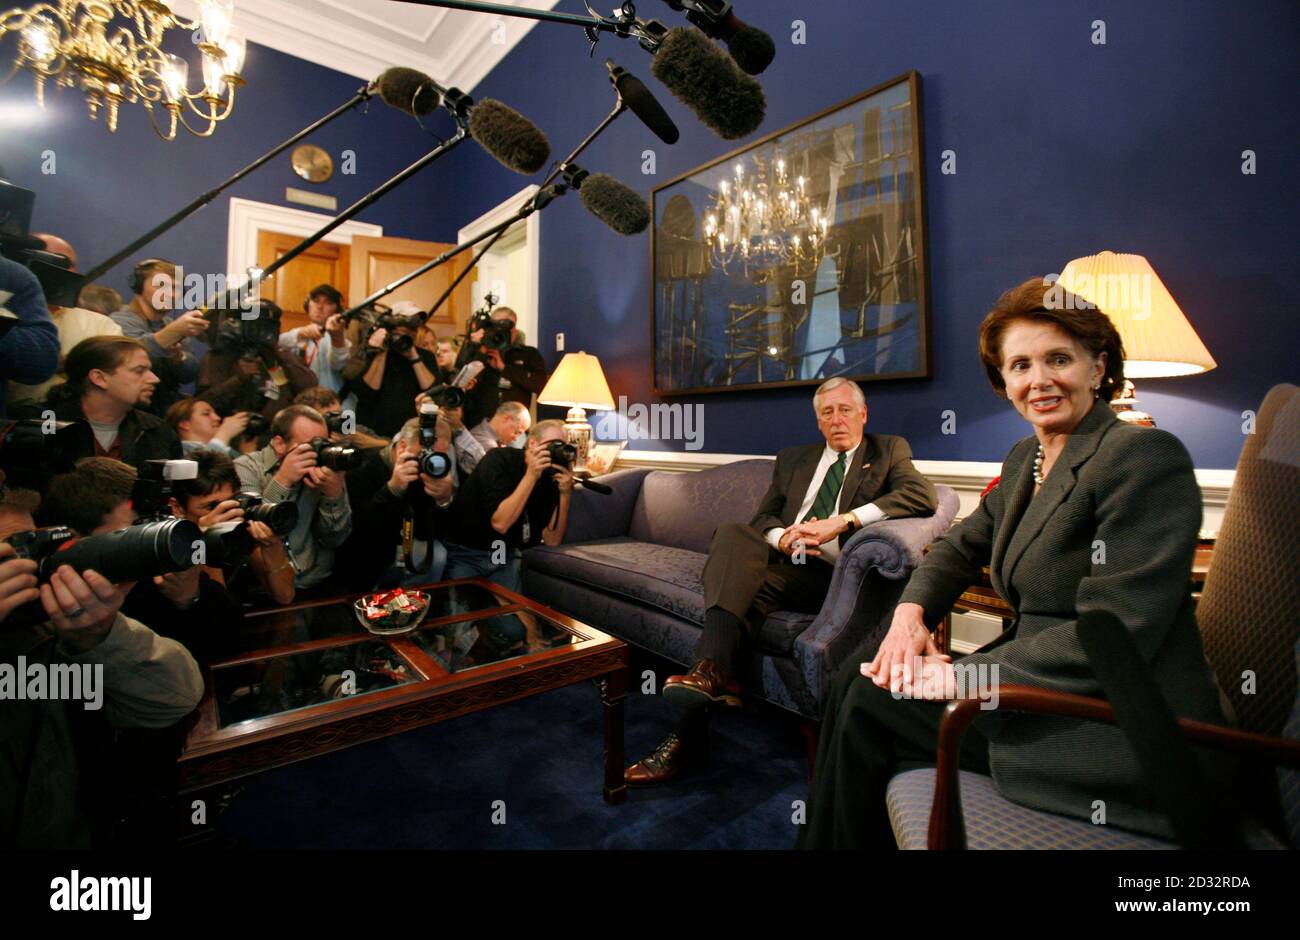 The U.S. House of Representatives speaker-designate Nancy Pelosi (R)(D-CA) meets with incoming Majority leader Steny Hoyer (D-MD) on Capitol Hill, November 20, 2006. The 110th U.S. Congress convenes in January.  REUTERS/Jason Reed (UNITED STATES) Stock Photo